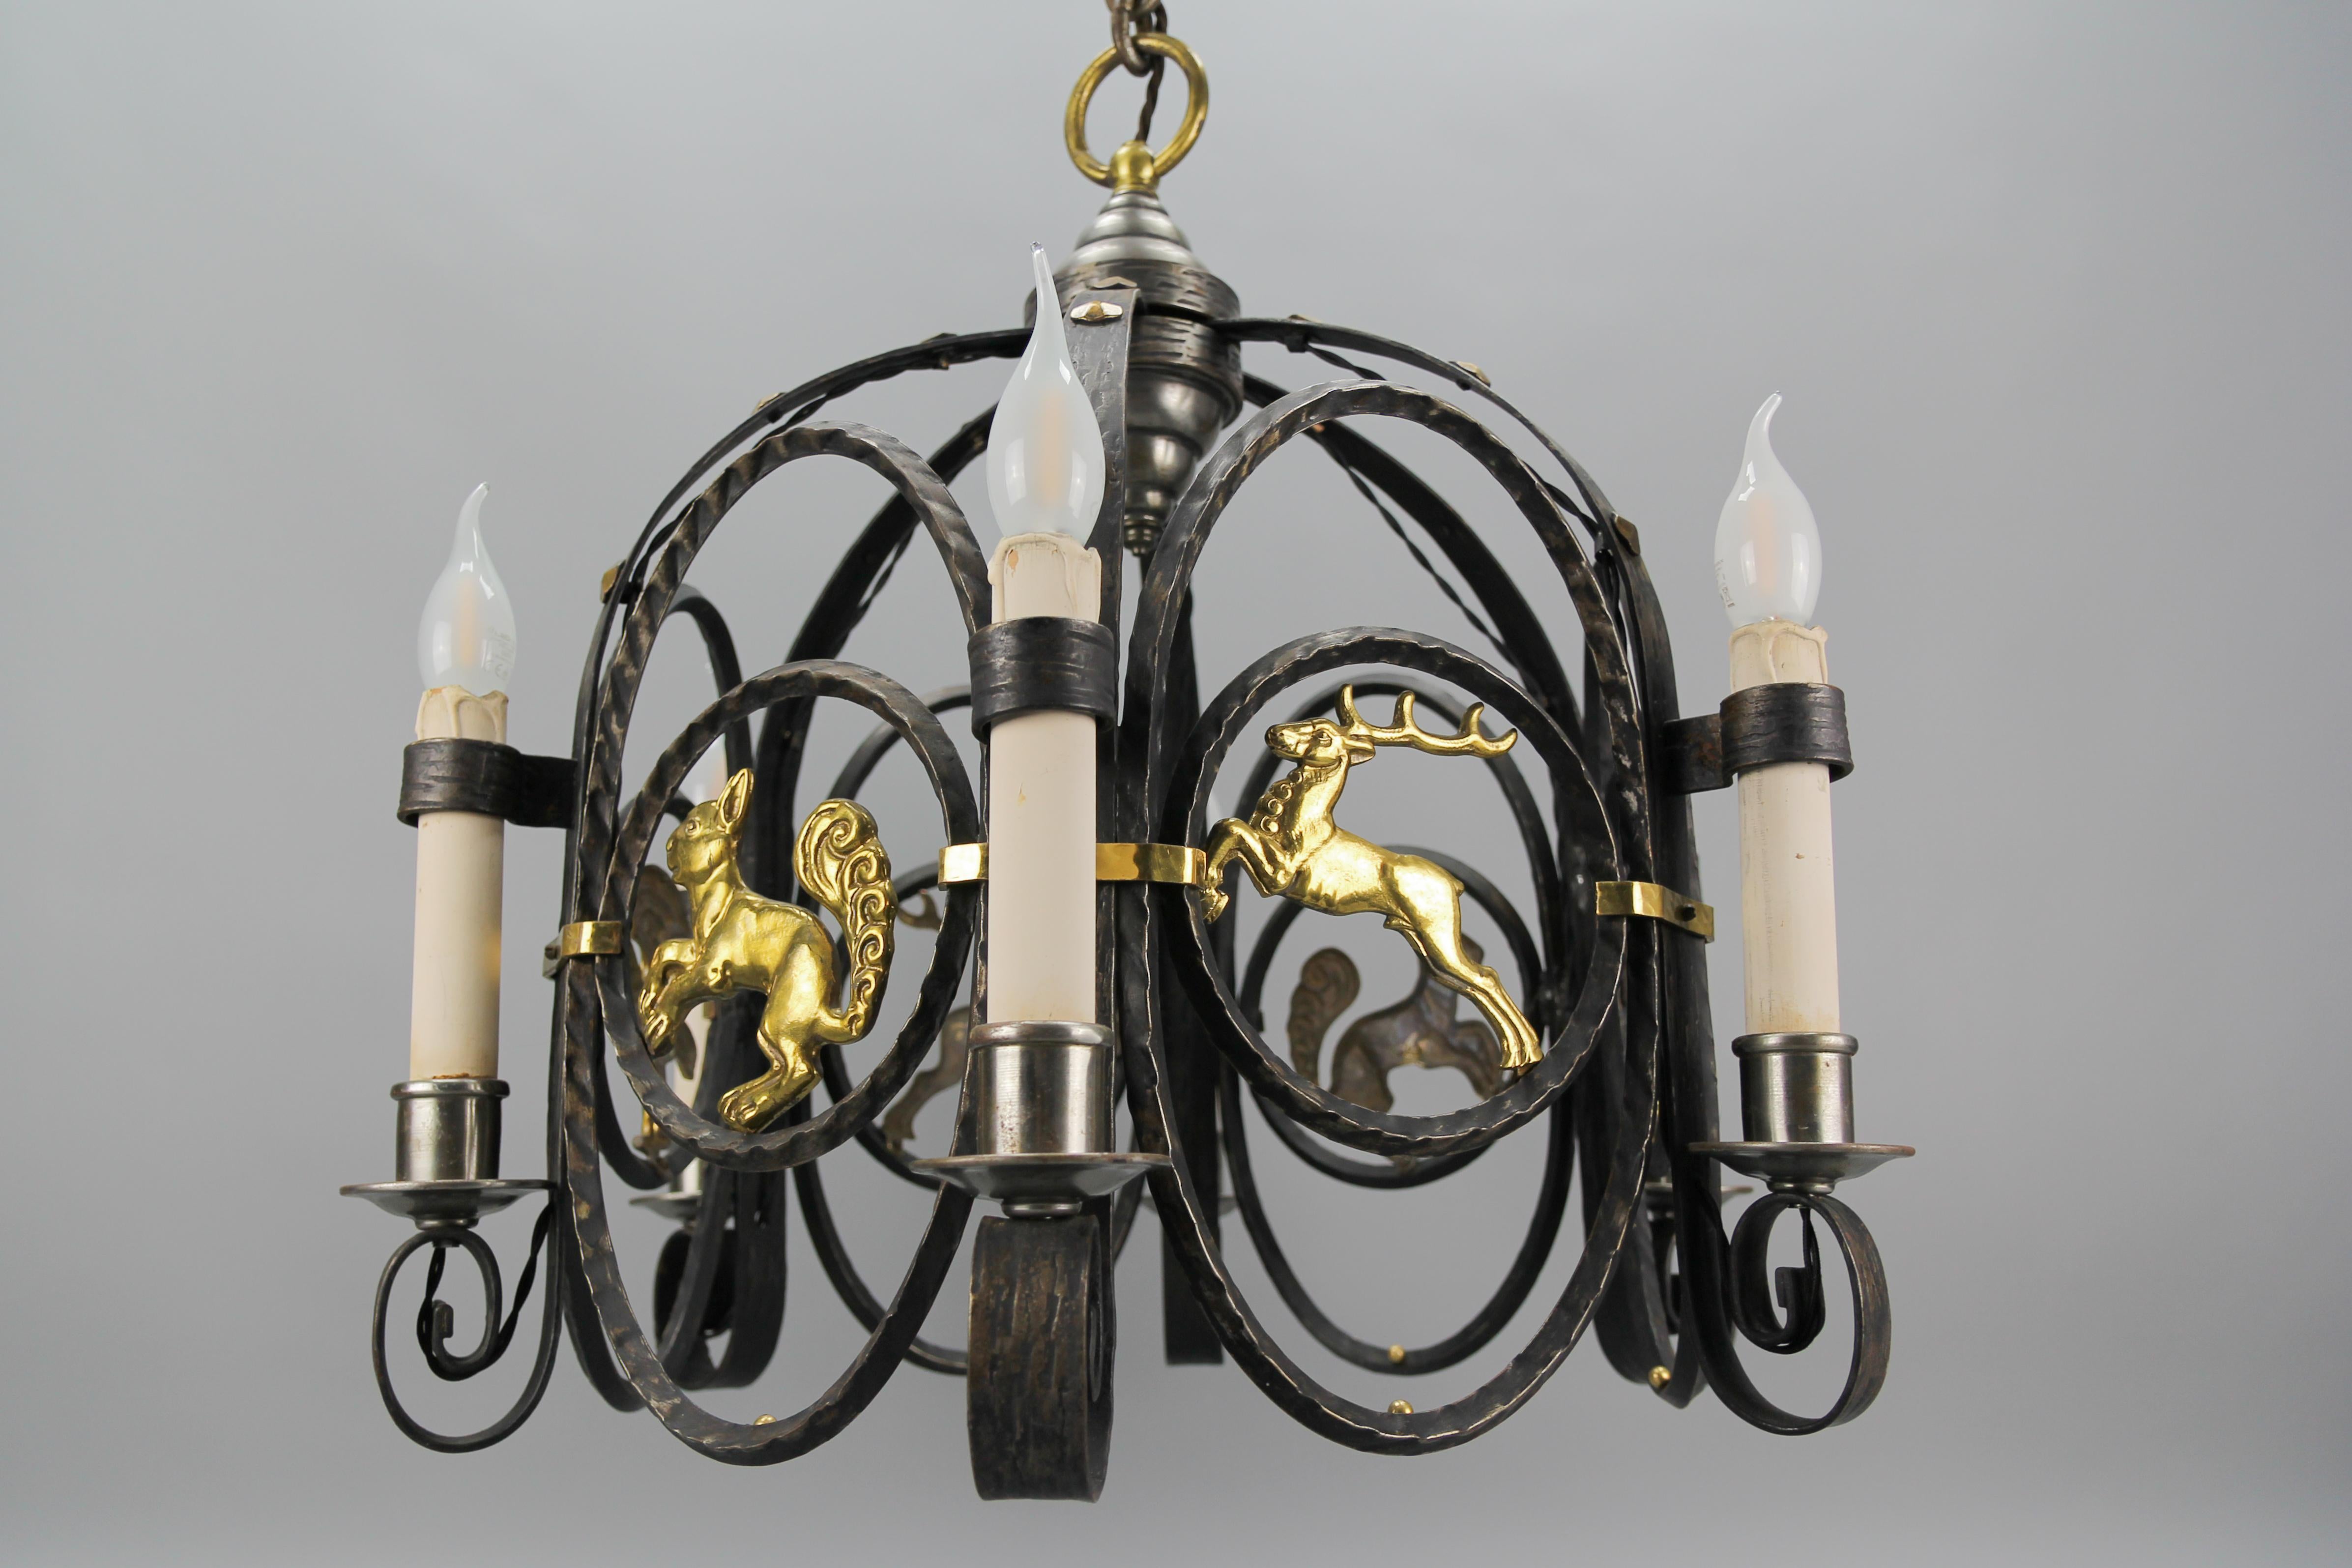 German Art Deco Nine-Light Wrought Iron and Brass Chandelier with Animals, 1920s For Sale 4